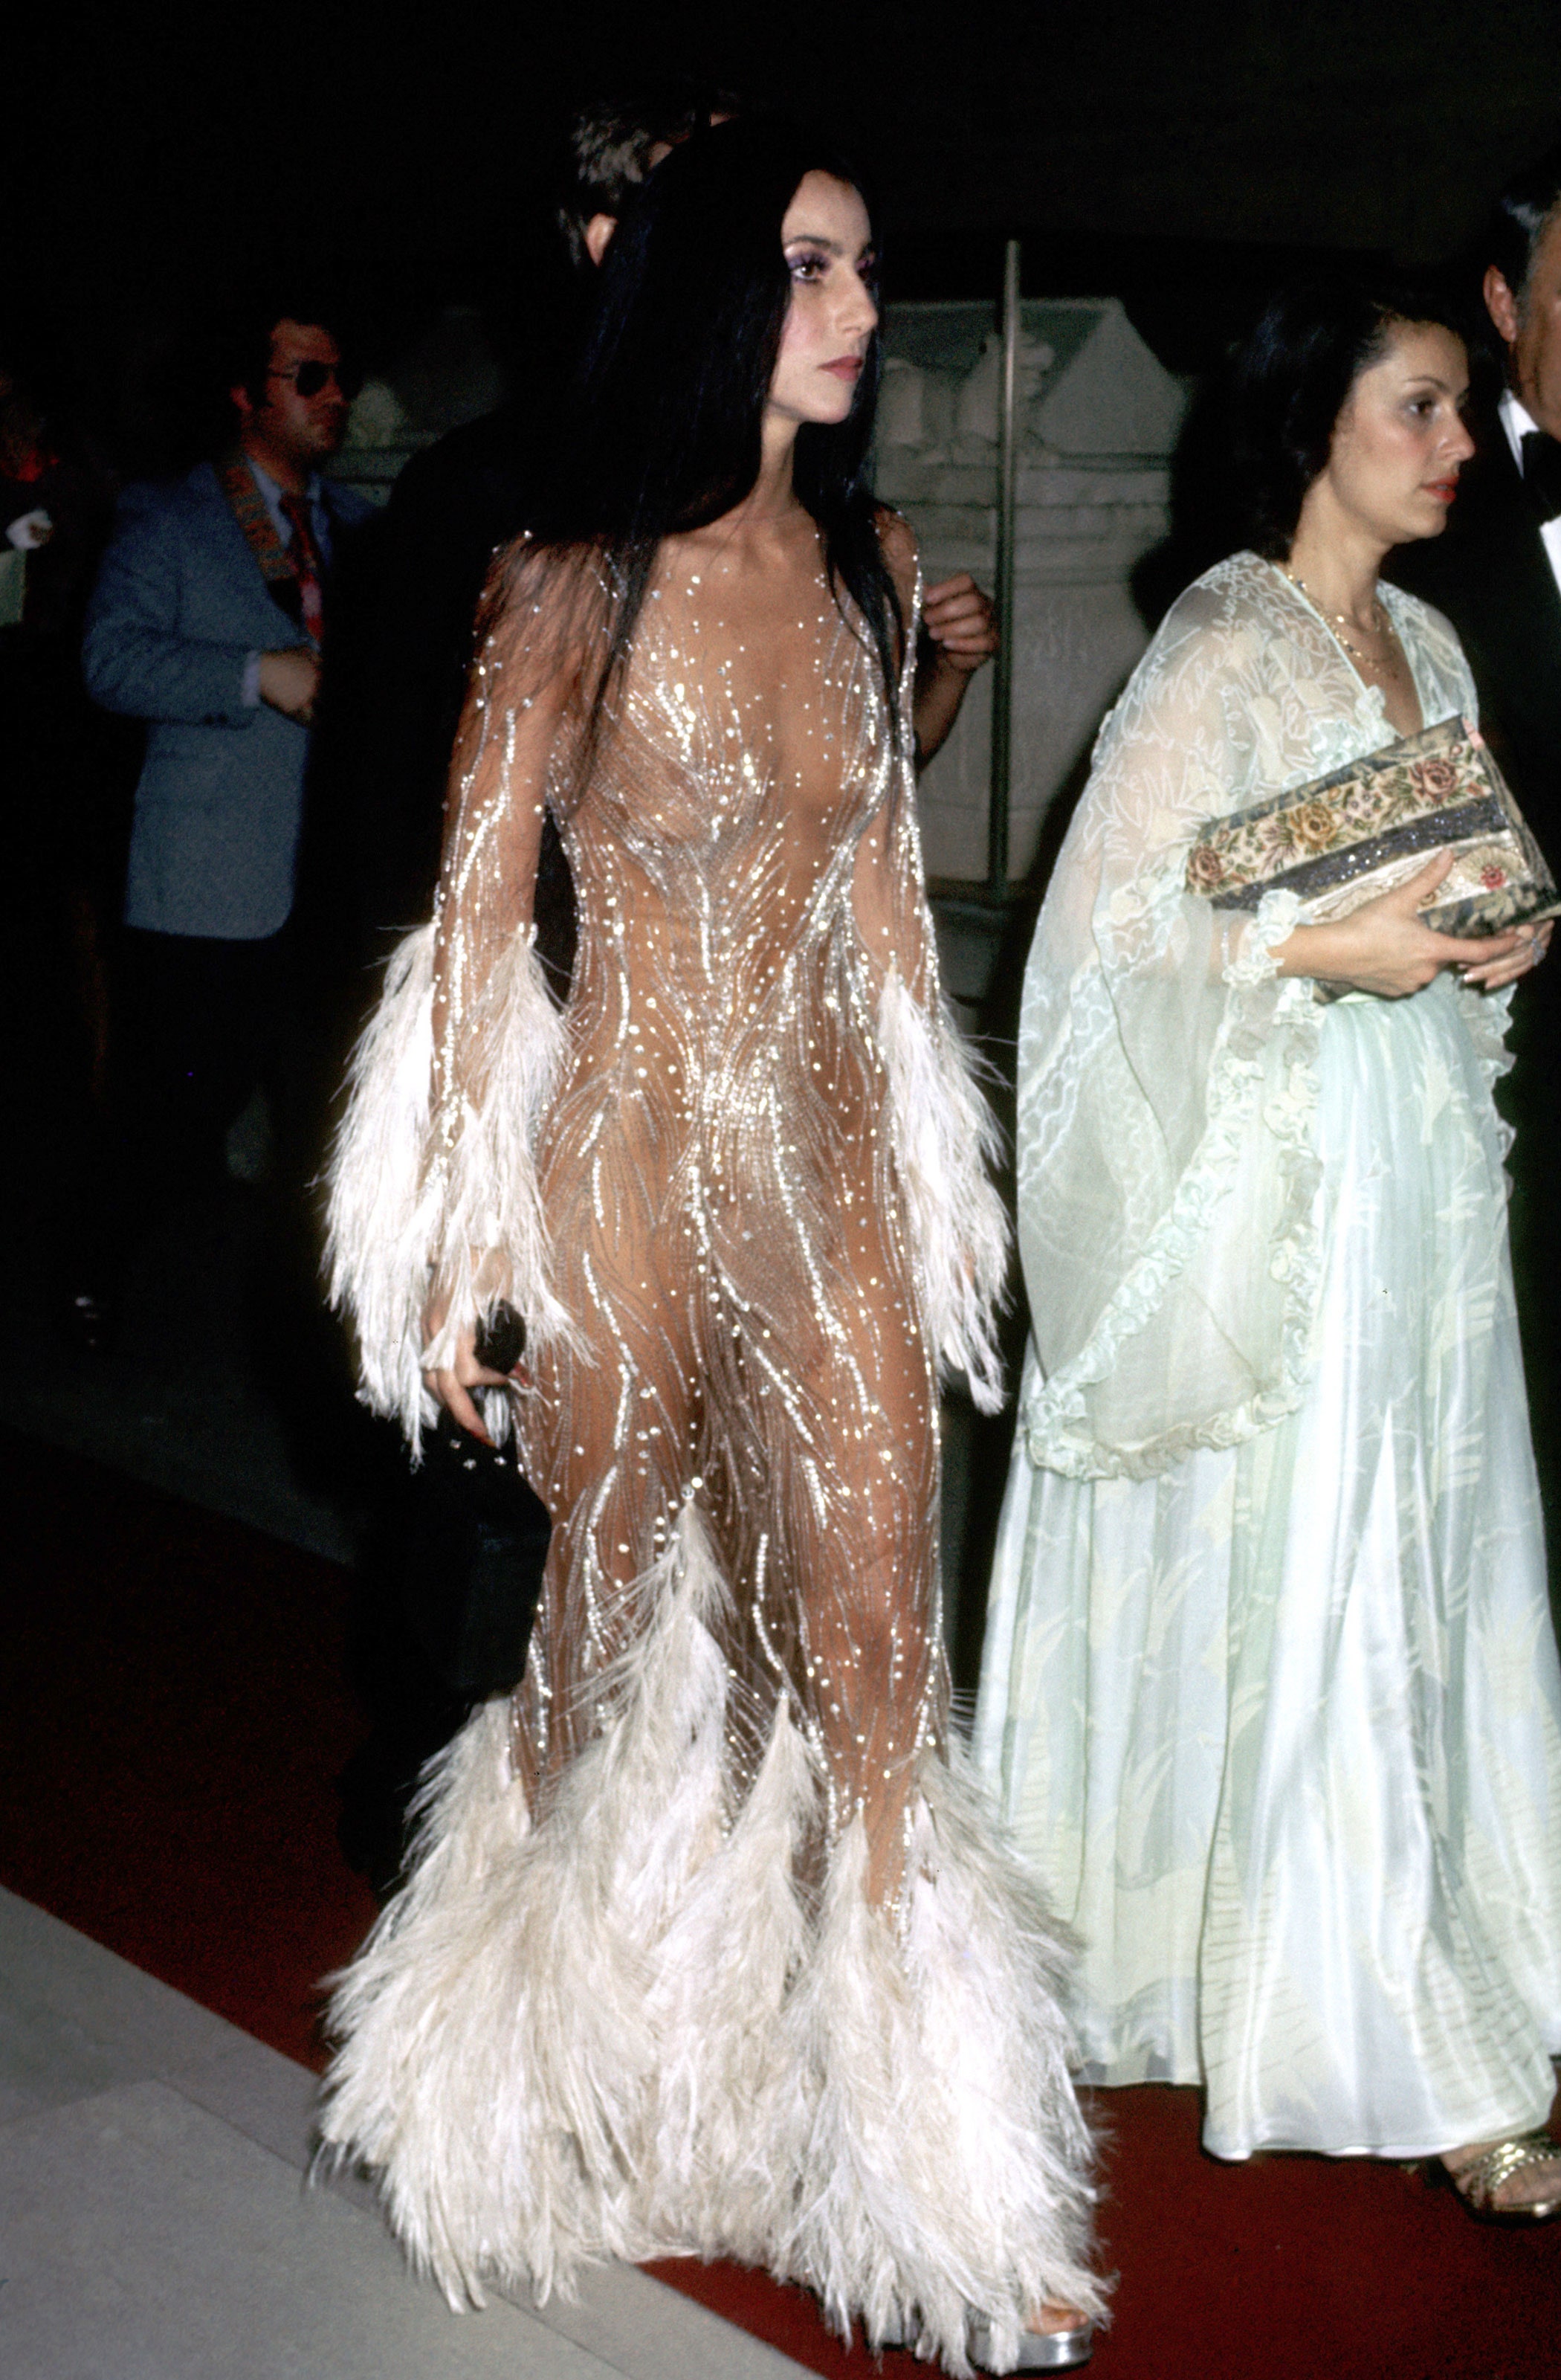 Cher wearing a white Bob Mackie feather dress